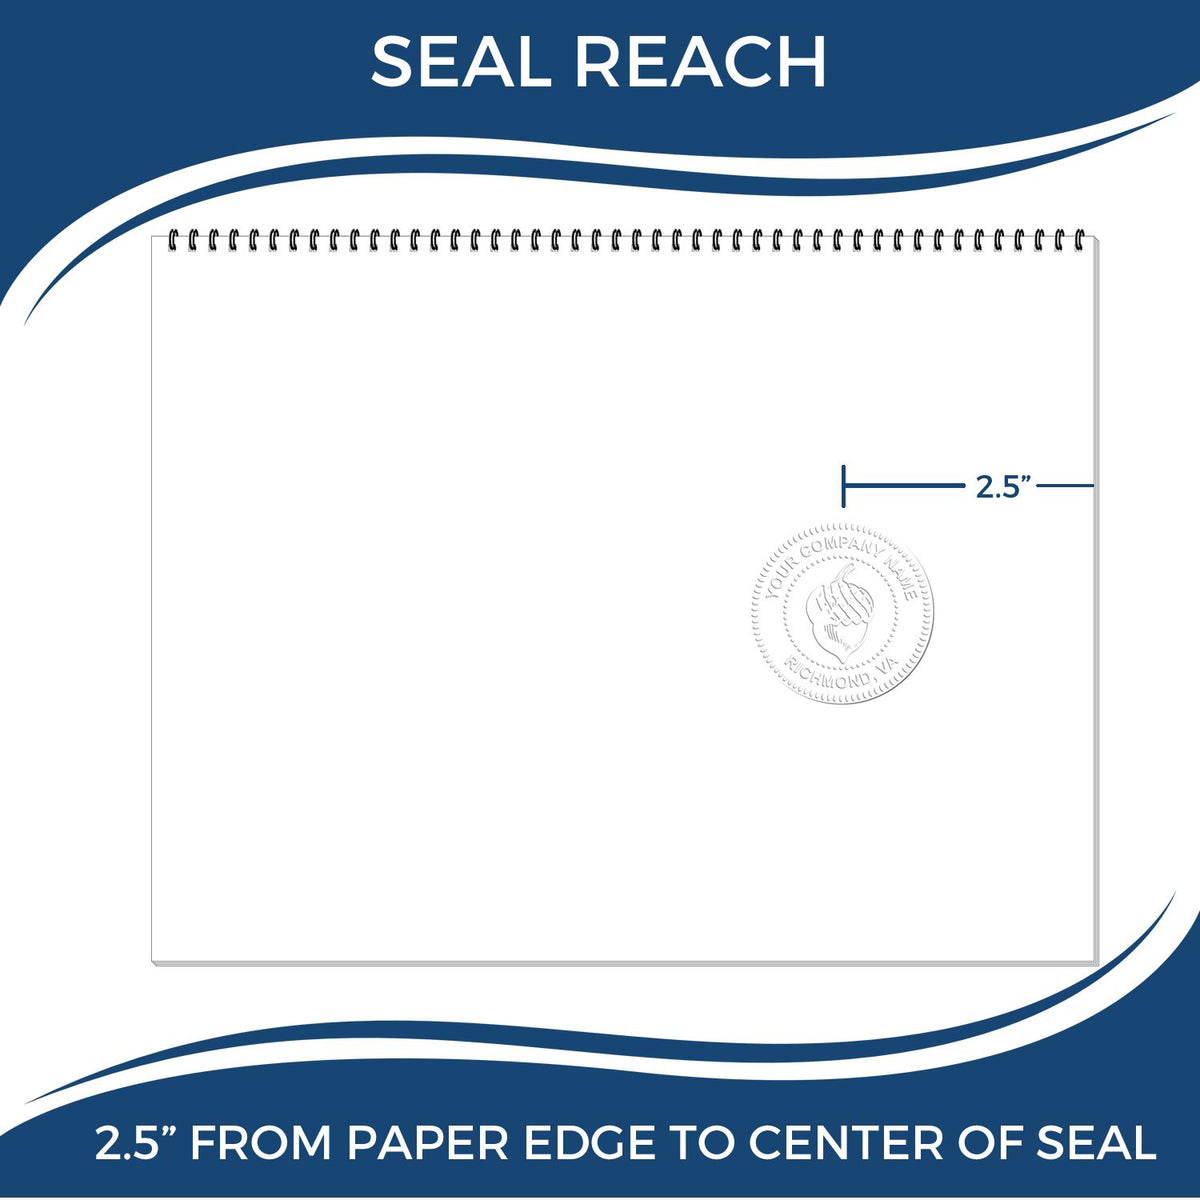 An infographic showing the seal reach which is represented by a ruler and a miniature seal image of the Heavy Duty Cast Iron Utah Architect Embosser